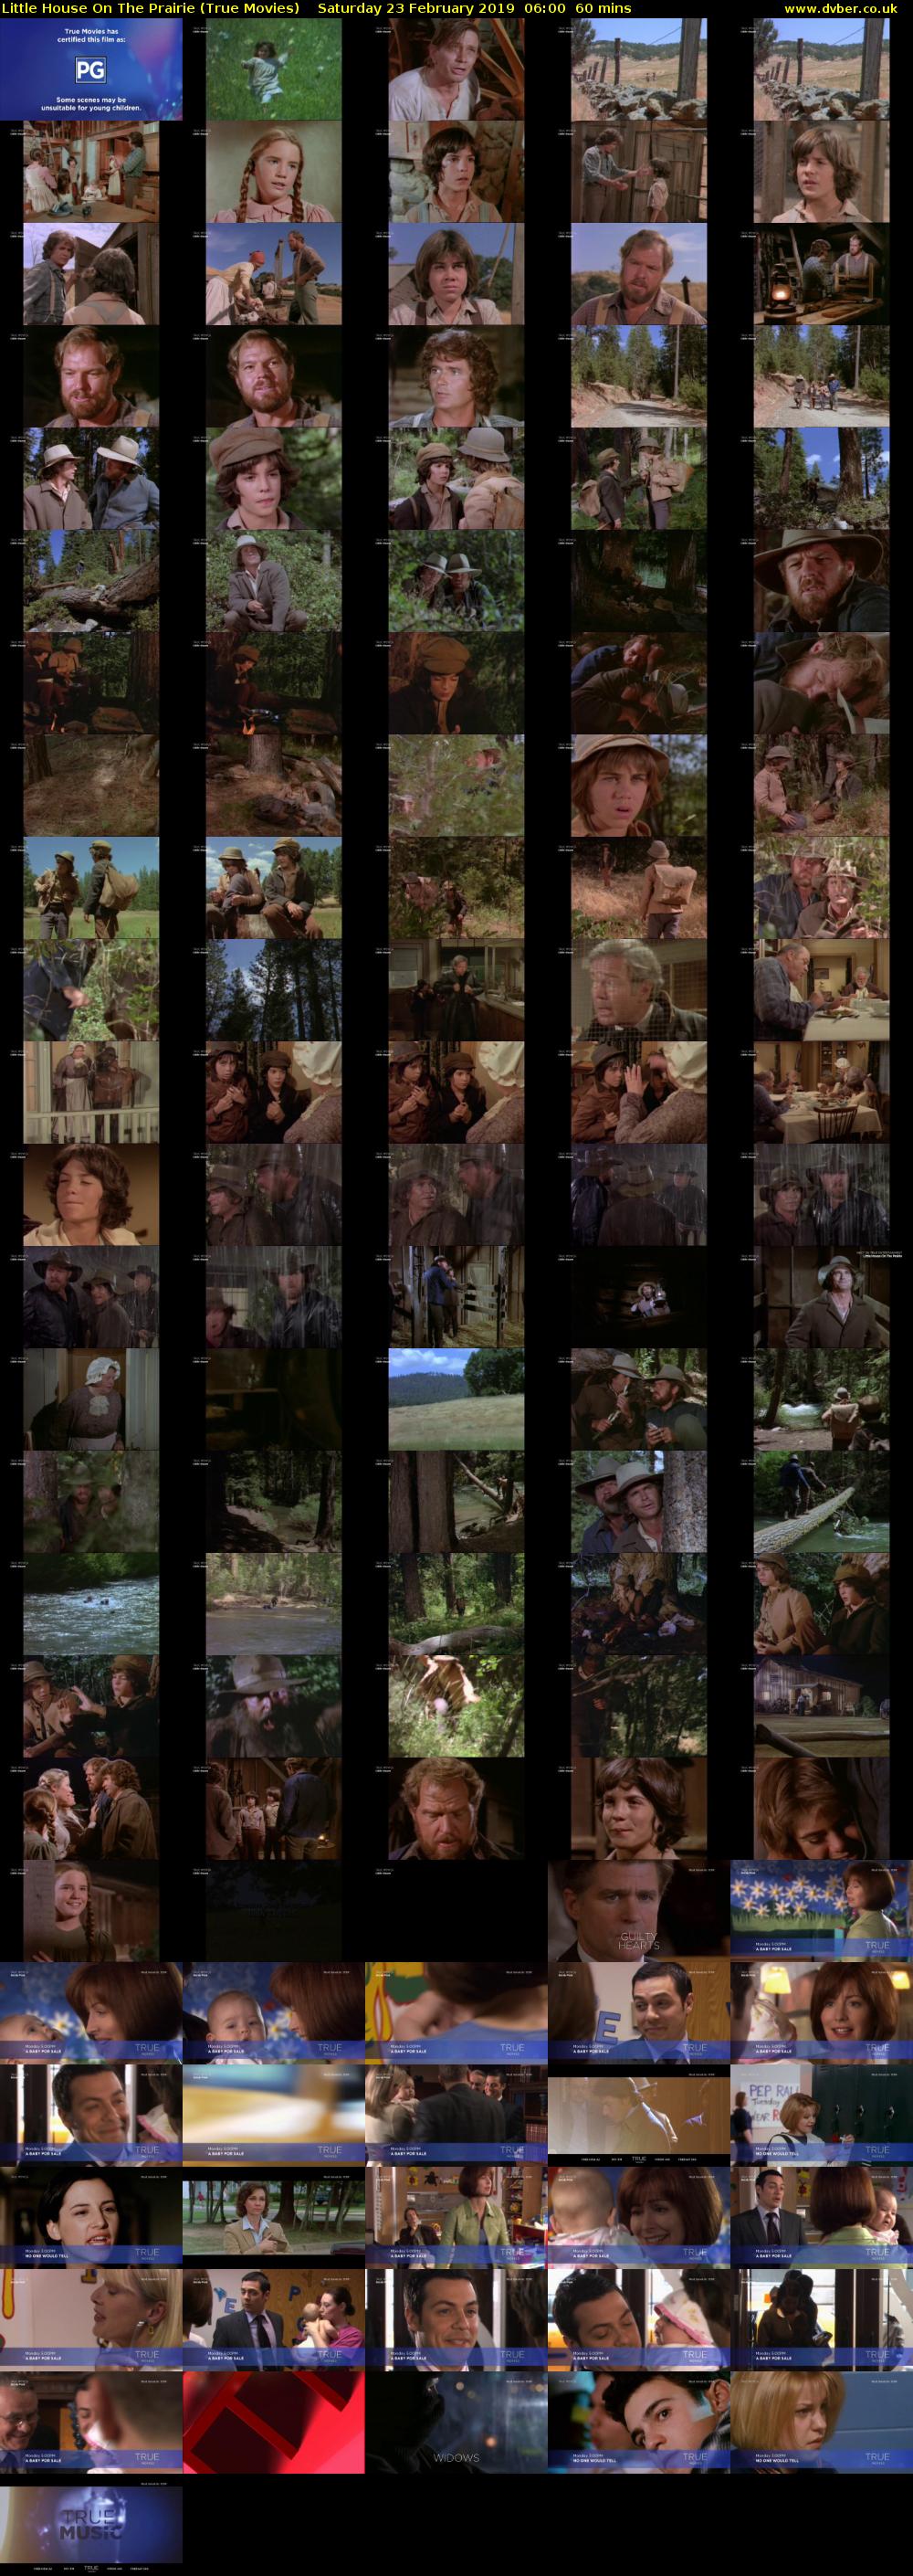 Little House On The Prairie (True Movies) Saturday 23 February 2019 06:00 - 07:00